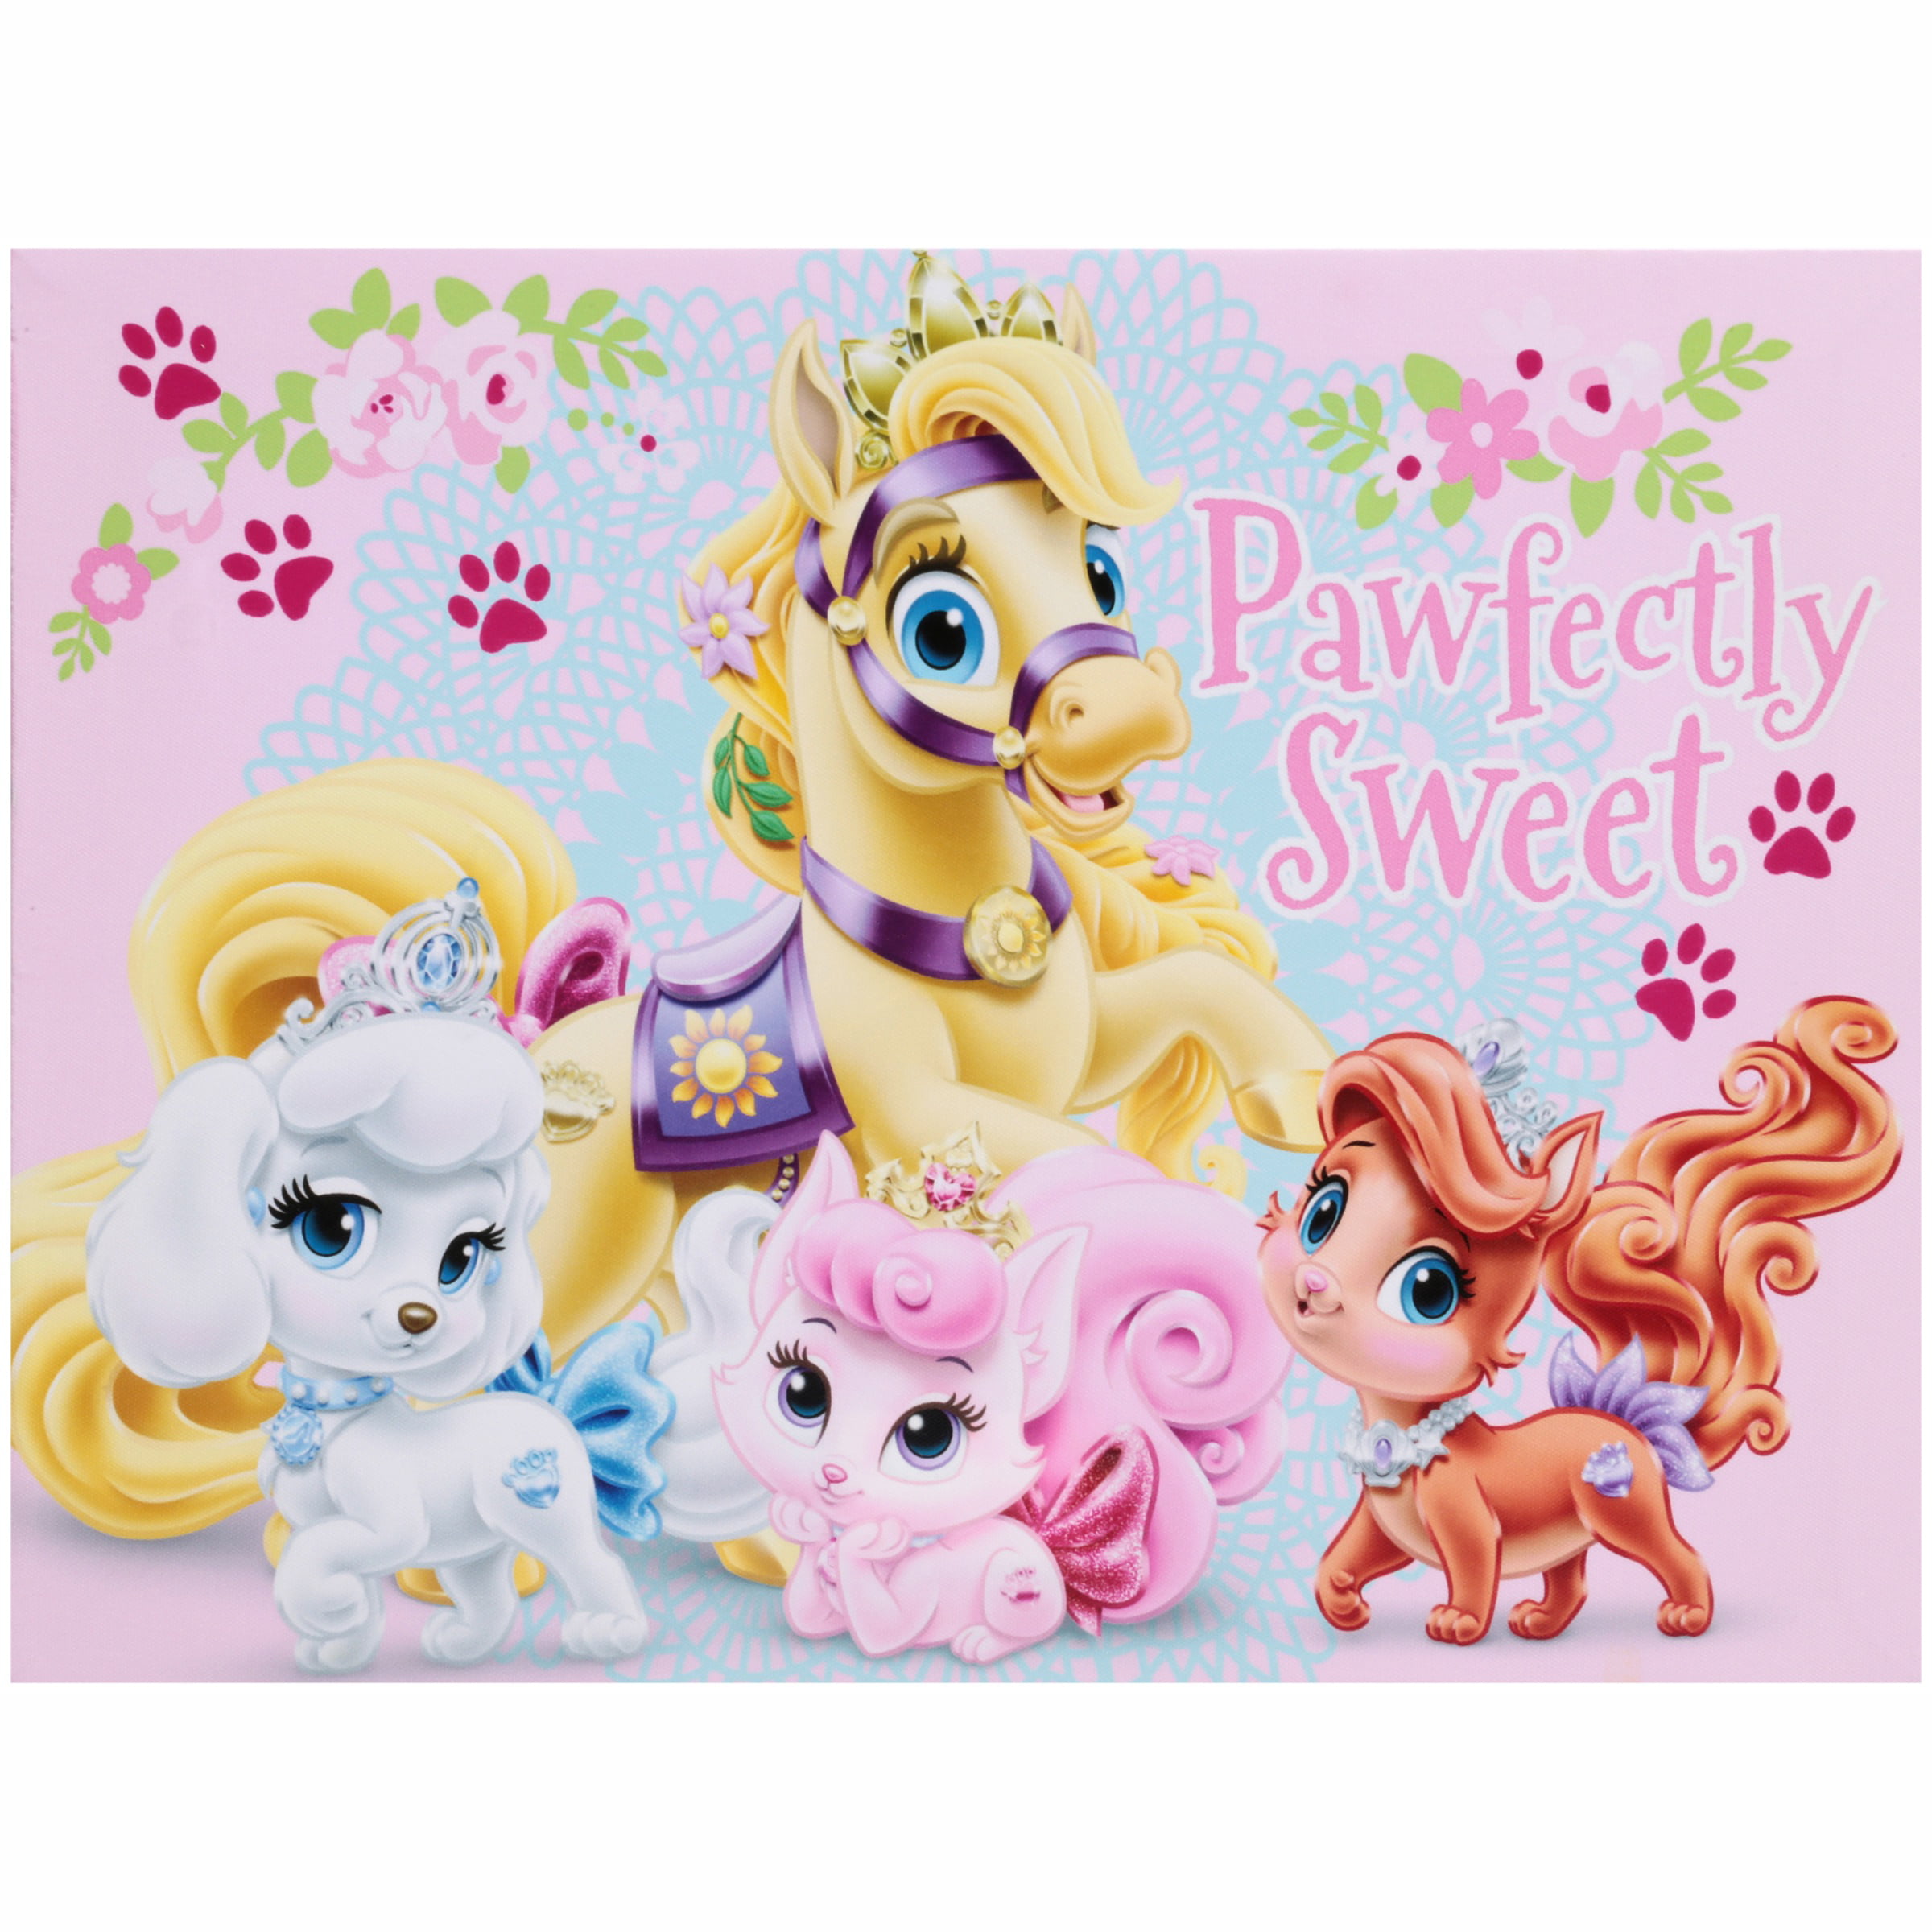 DISNEY PRINCESS PALACE PETS Wall Decals Room Decor Stickers FOREVER FRIEND Quote 